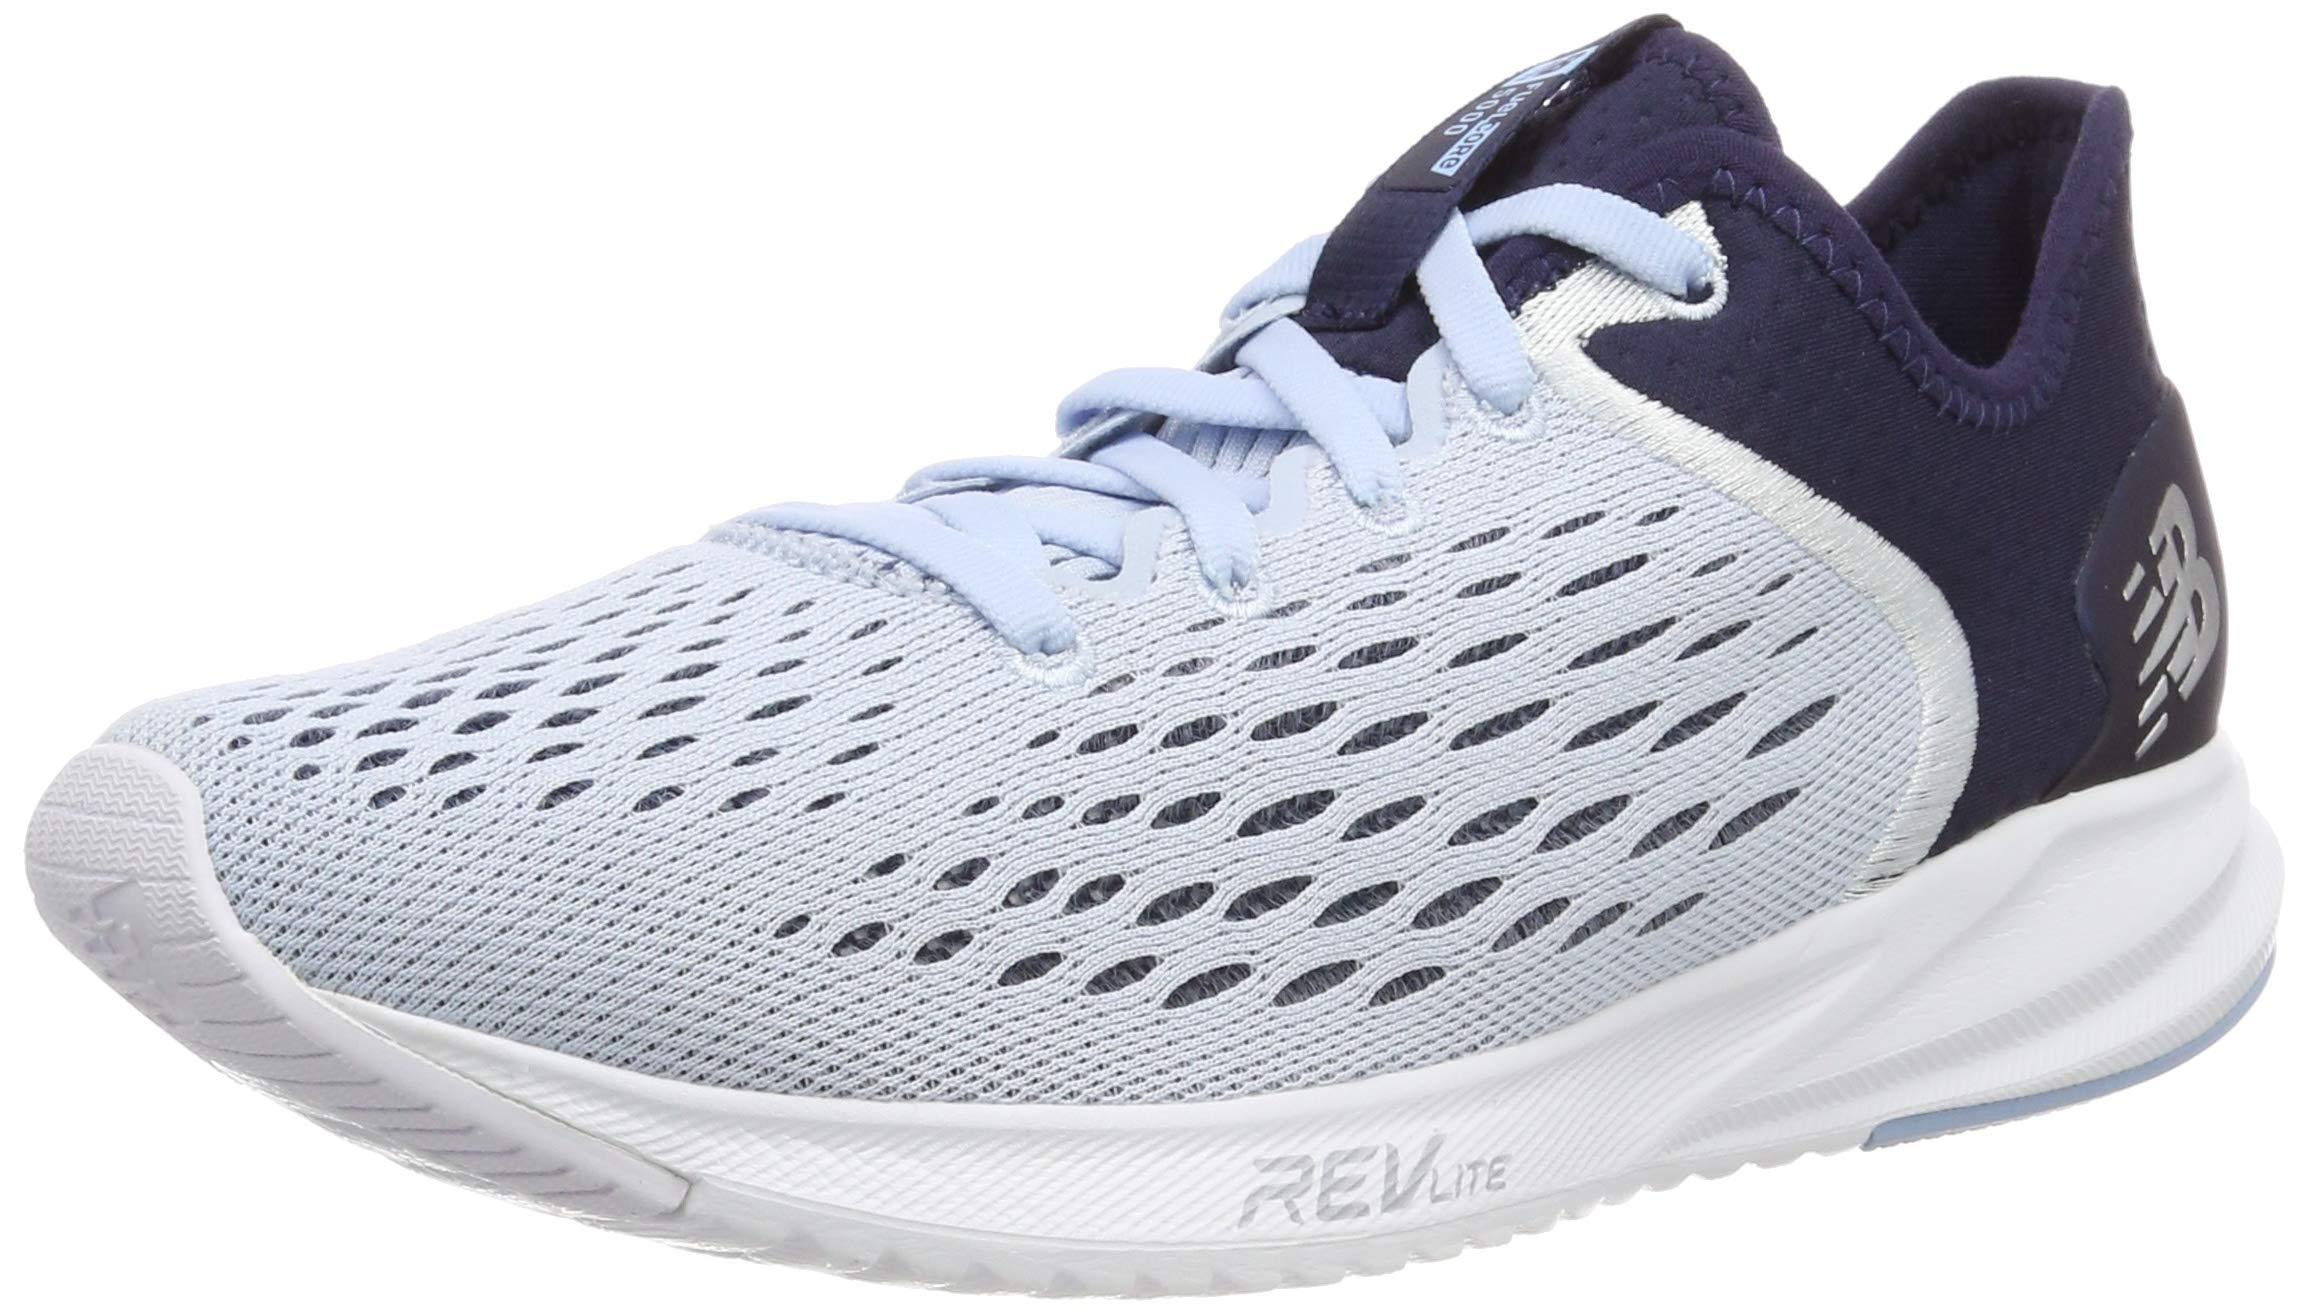 New Balance Rubber Fuel Core 5000 Running Shoes in Blue (Light Blue Light  Blue) (Blue) - Save 60% - Lyst